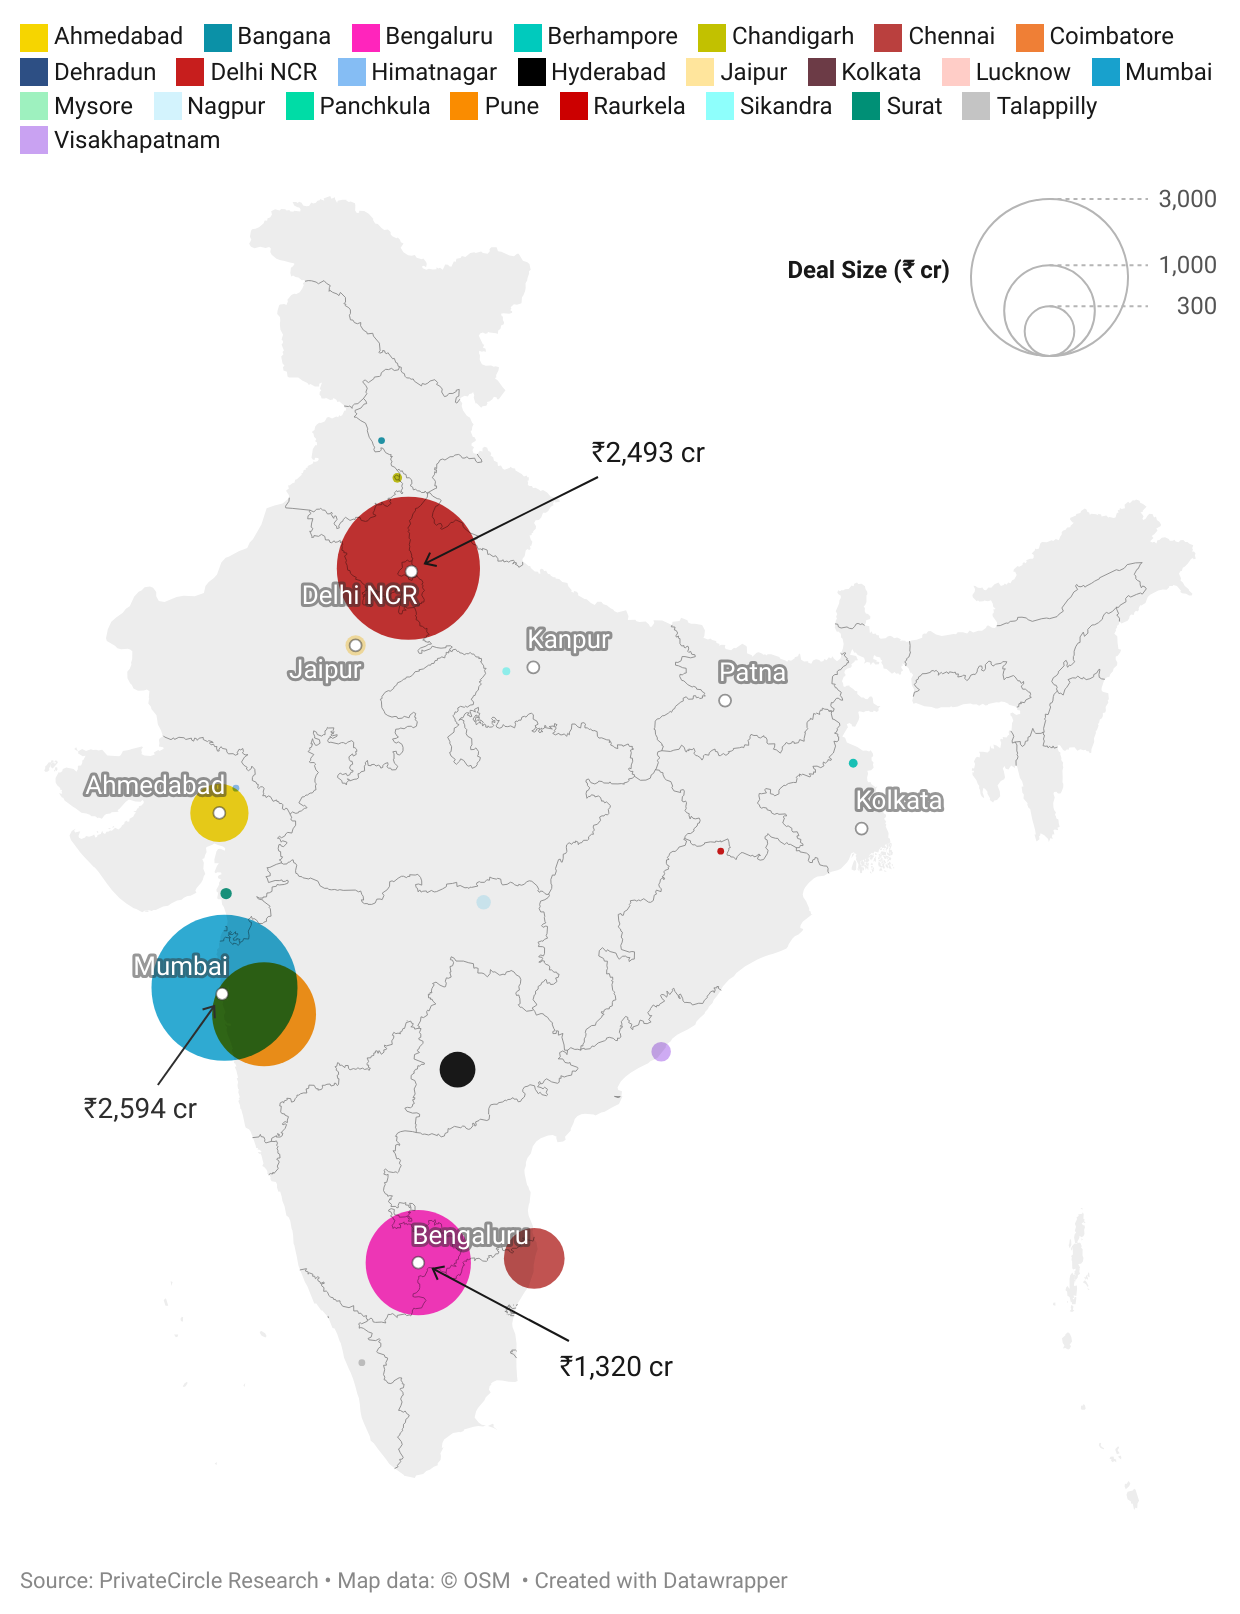 City-Wise Funding in March 2024.

Mumbai, Delhi NCR, and Bengaluru were the top 3 cities last month (March 2024) by the total value of funding raised.
